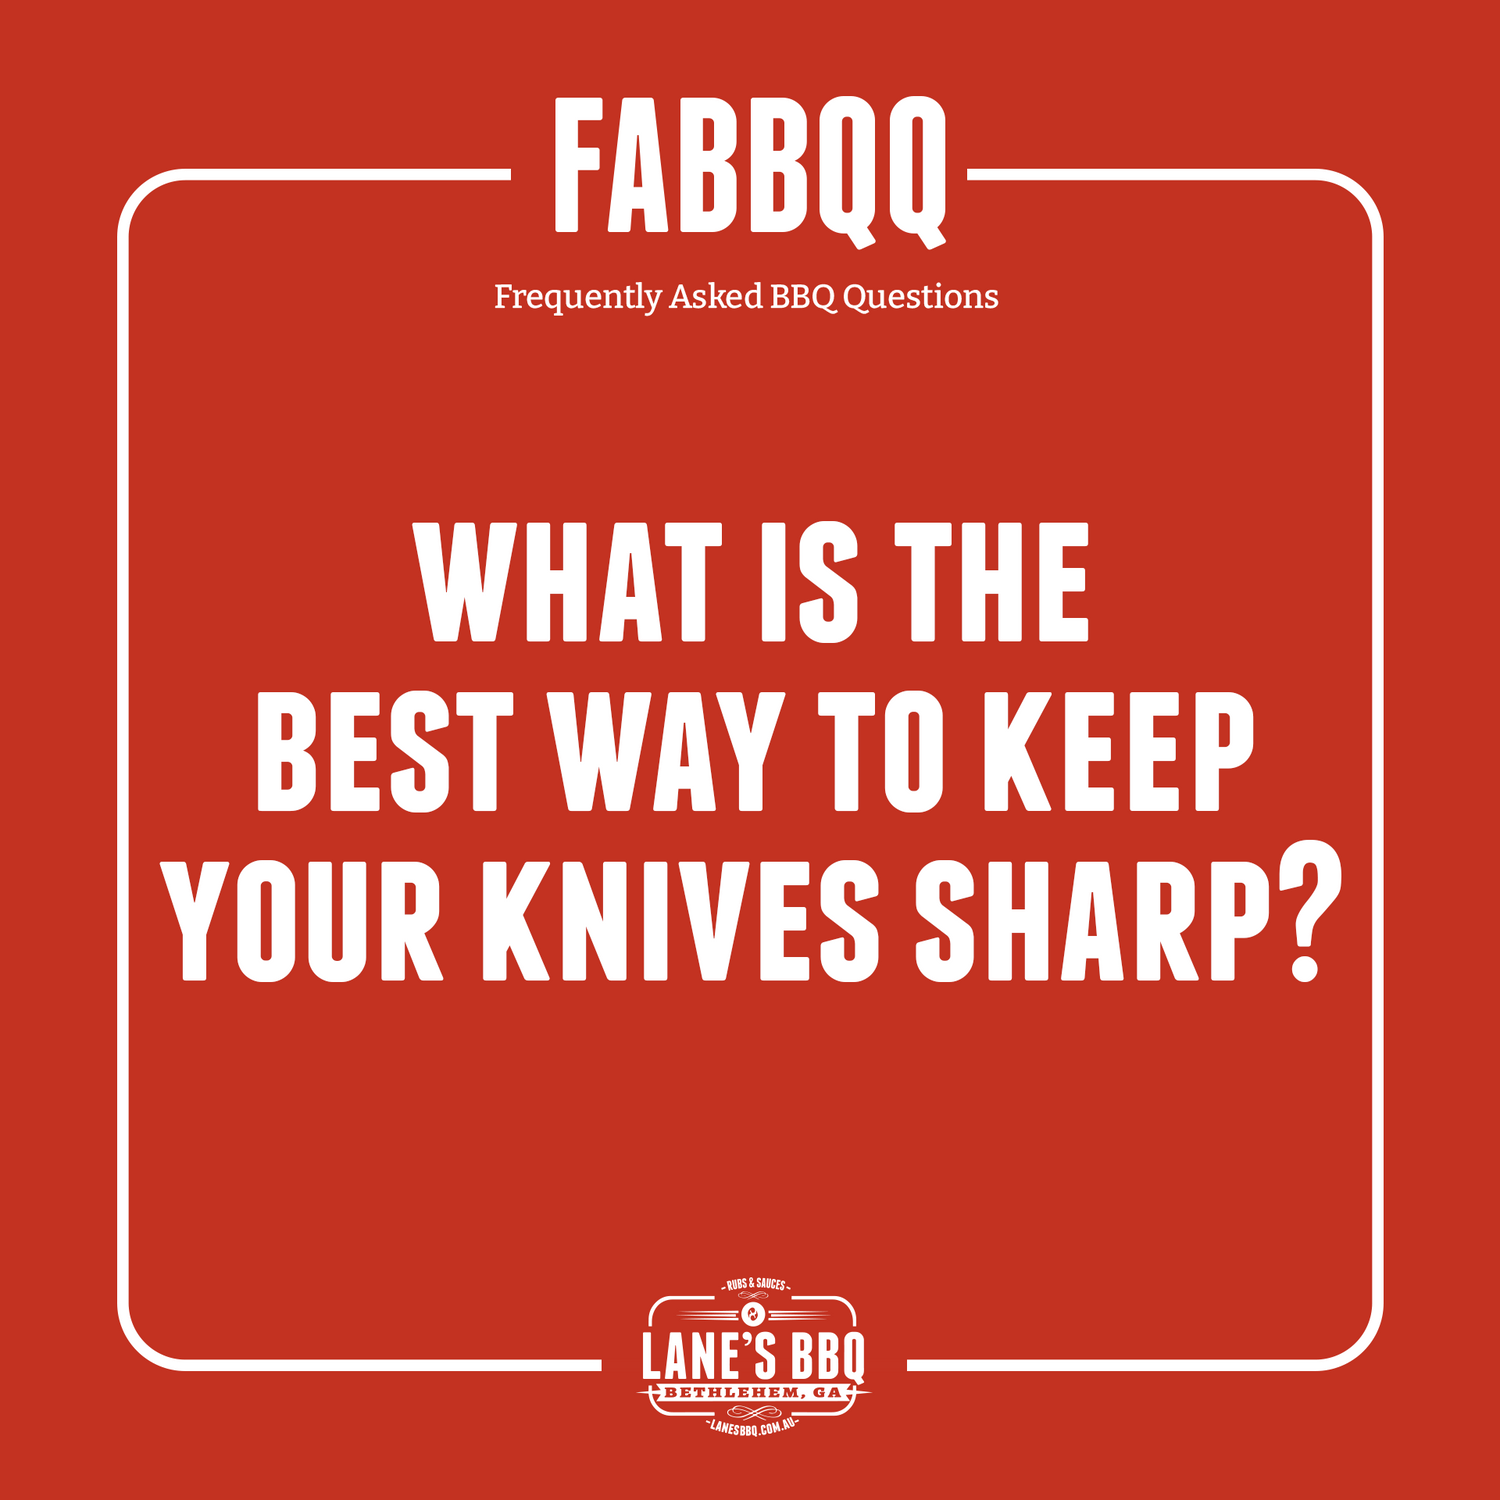 What is the best way to keep you knives sharp?